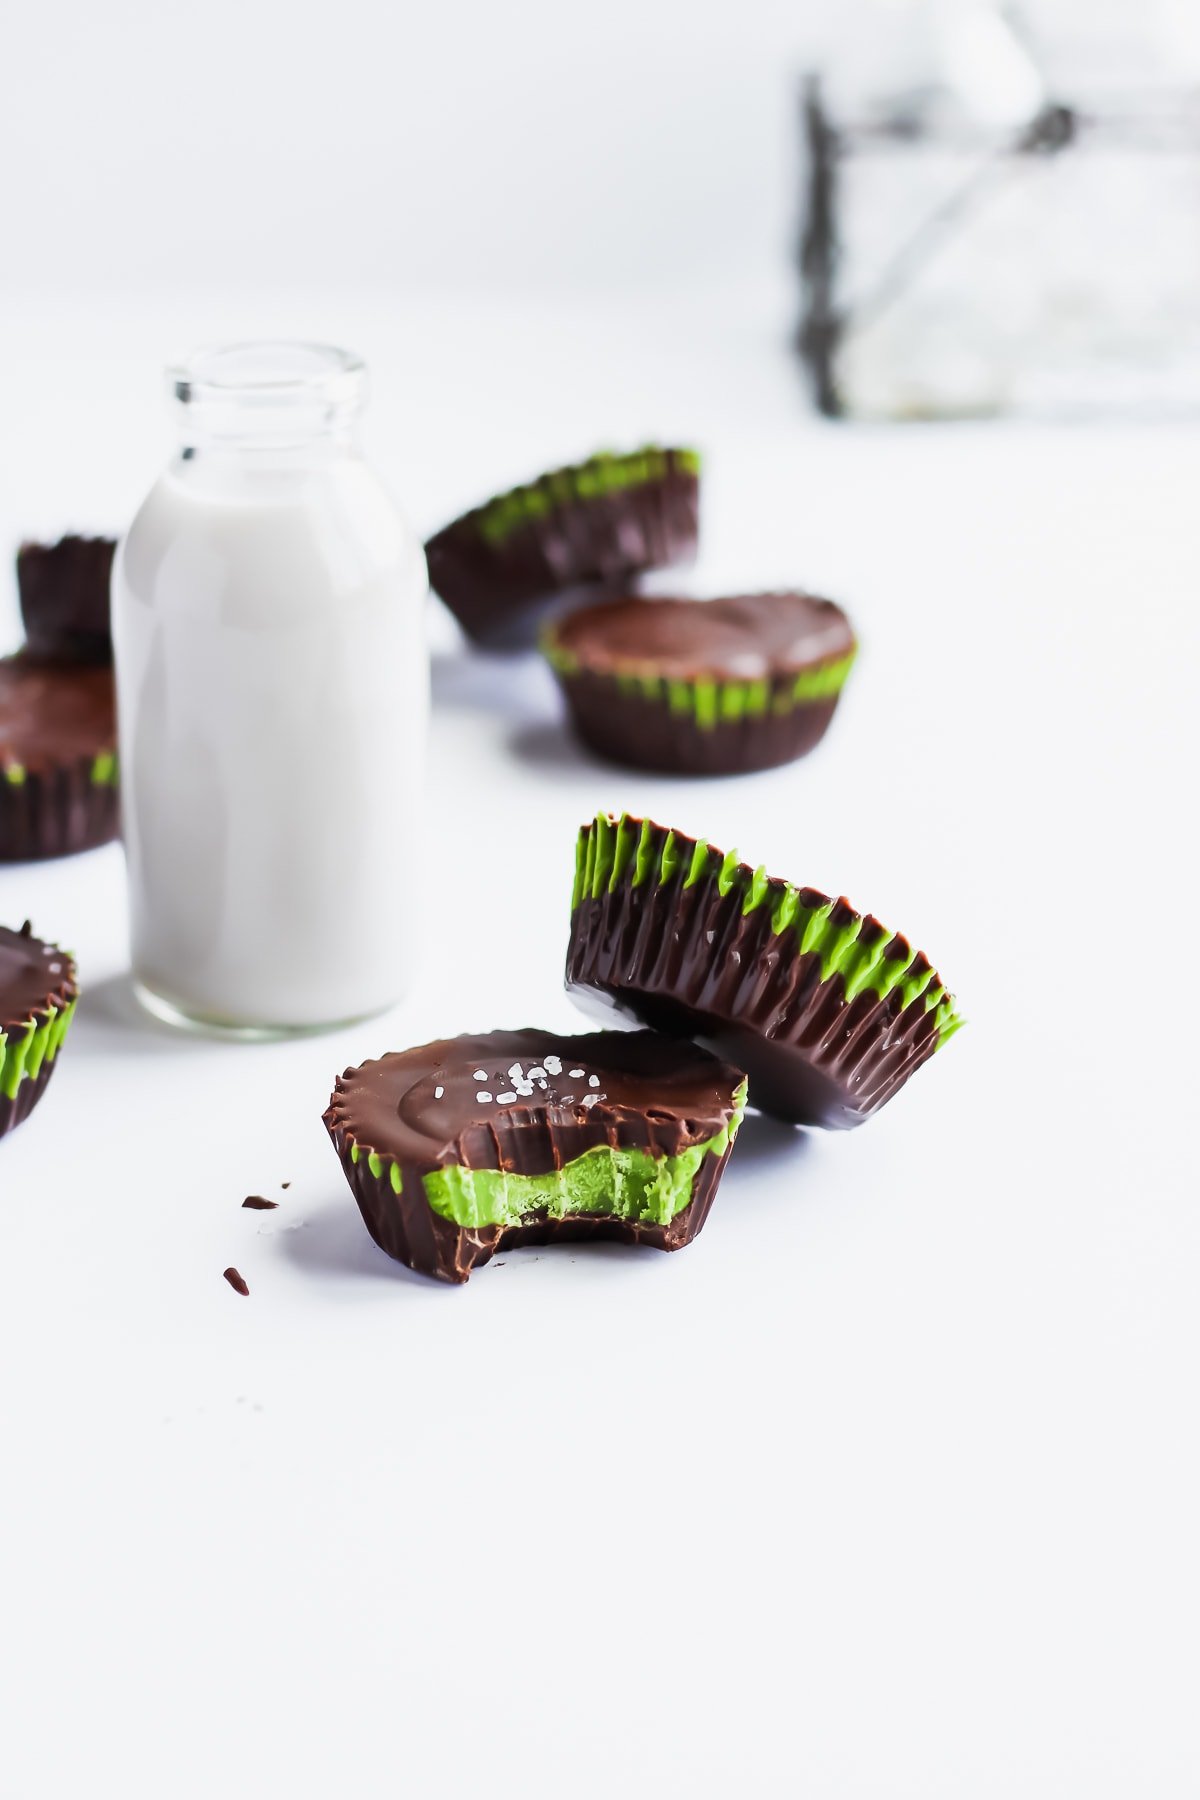 Matcha Coconut Butter Cups - a delicious indulgence that is paleo and gluten free! #paleo